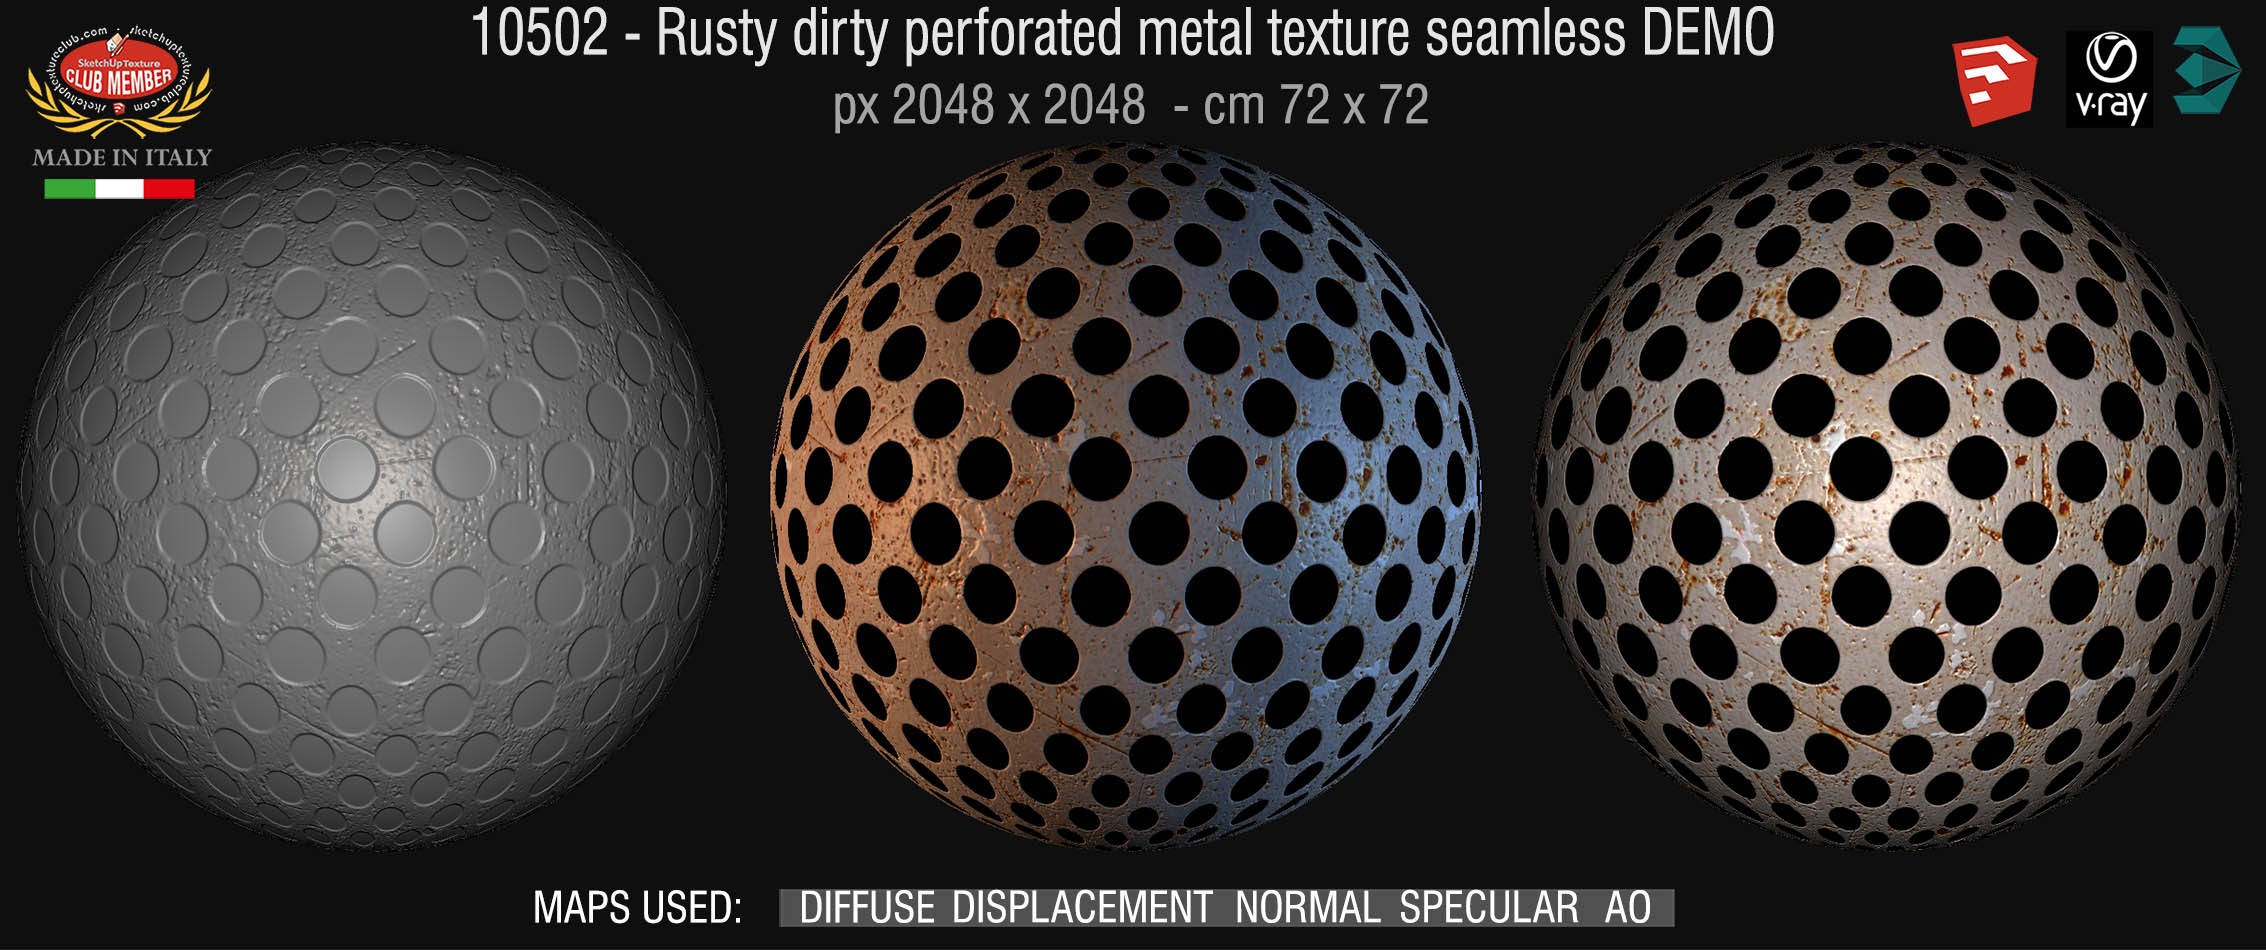 10502 HR Rusty dirty perforated metal texture seamless + maps DEMO